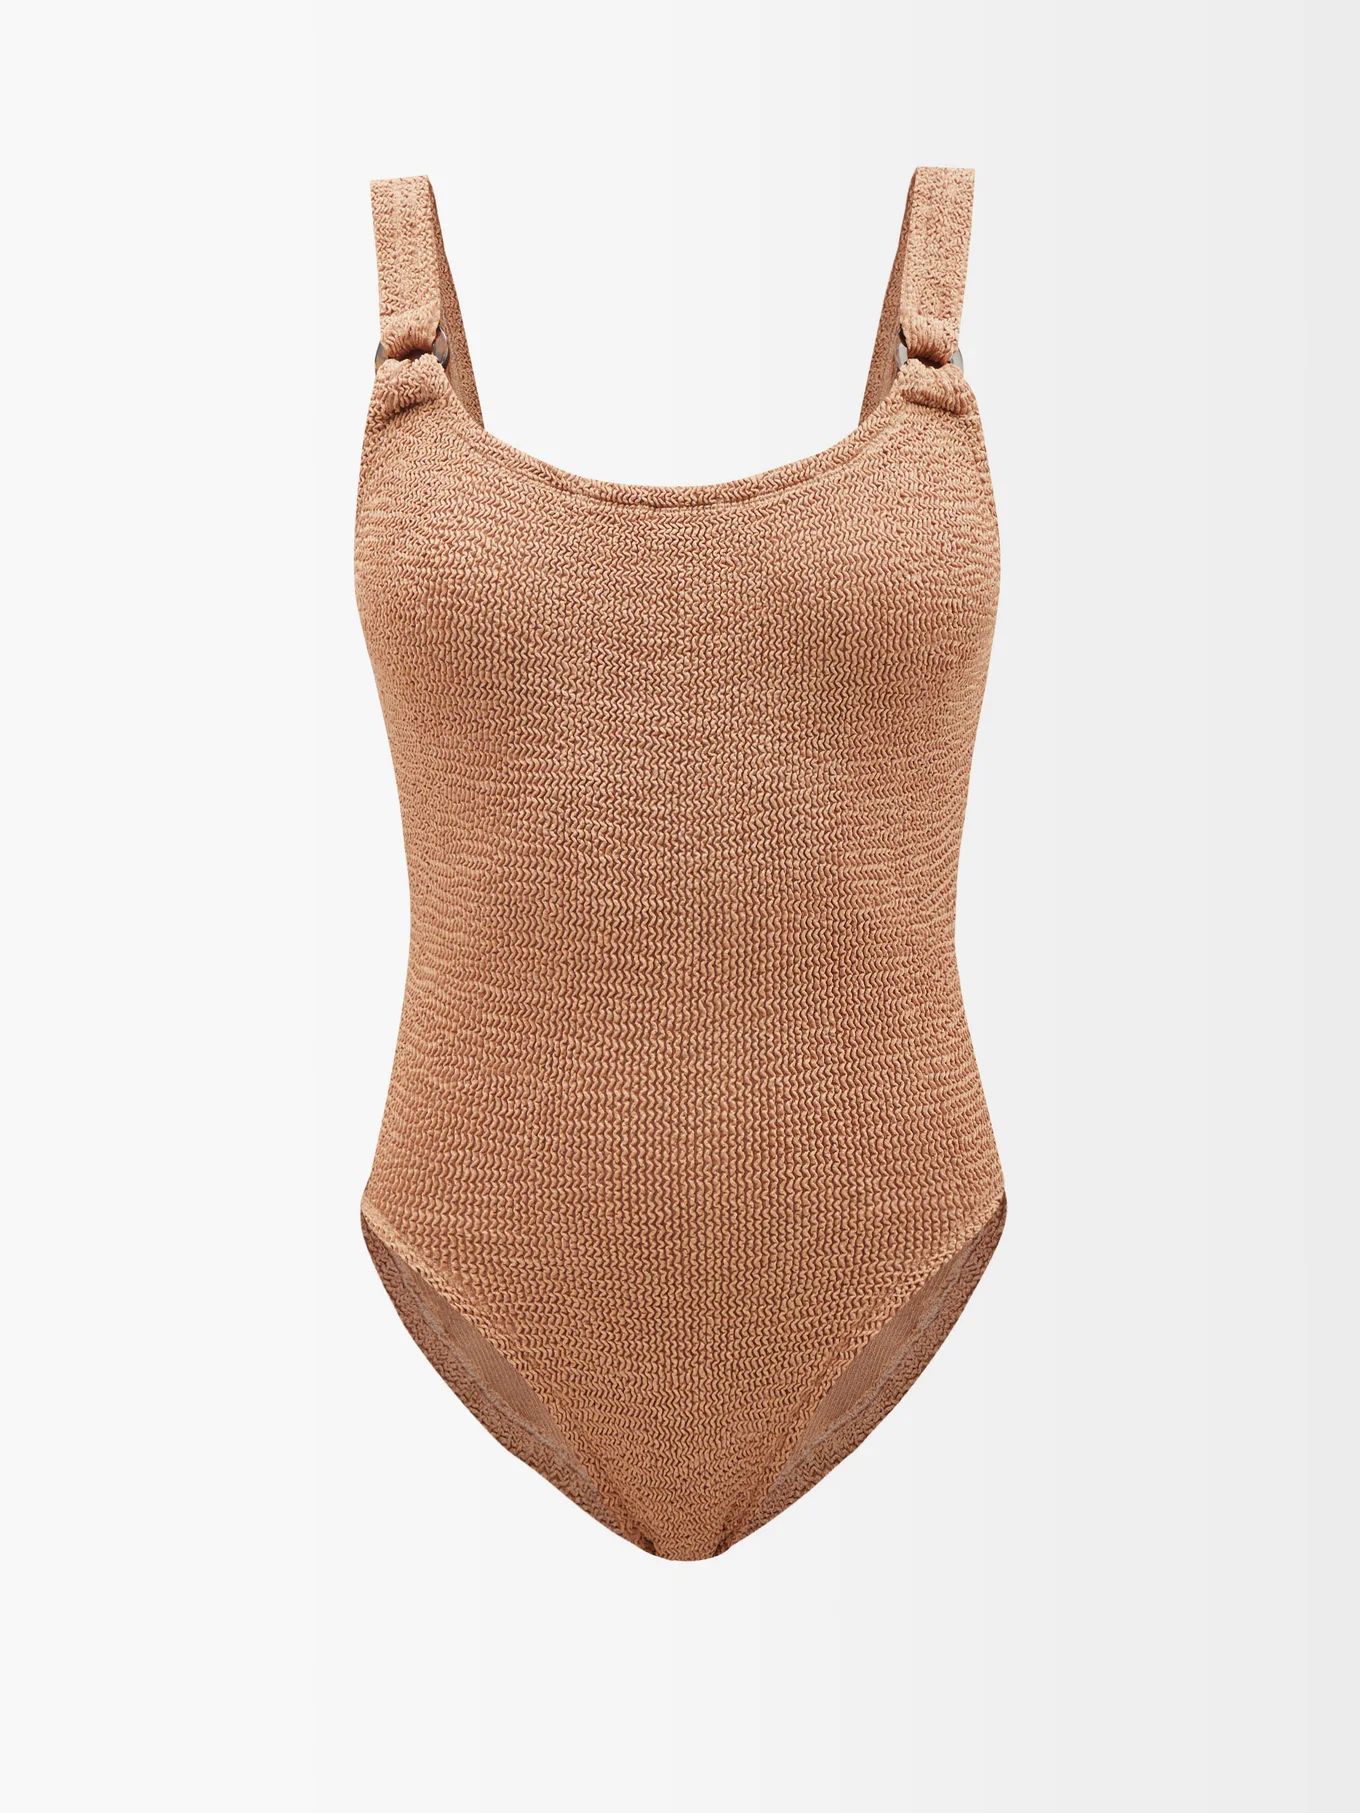 Domino crinkle-knit swimsuit | Hunza G | Matches (US)